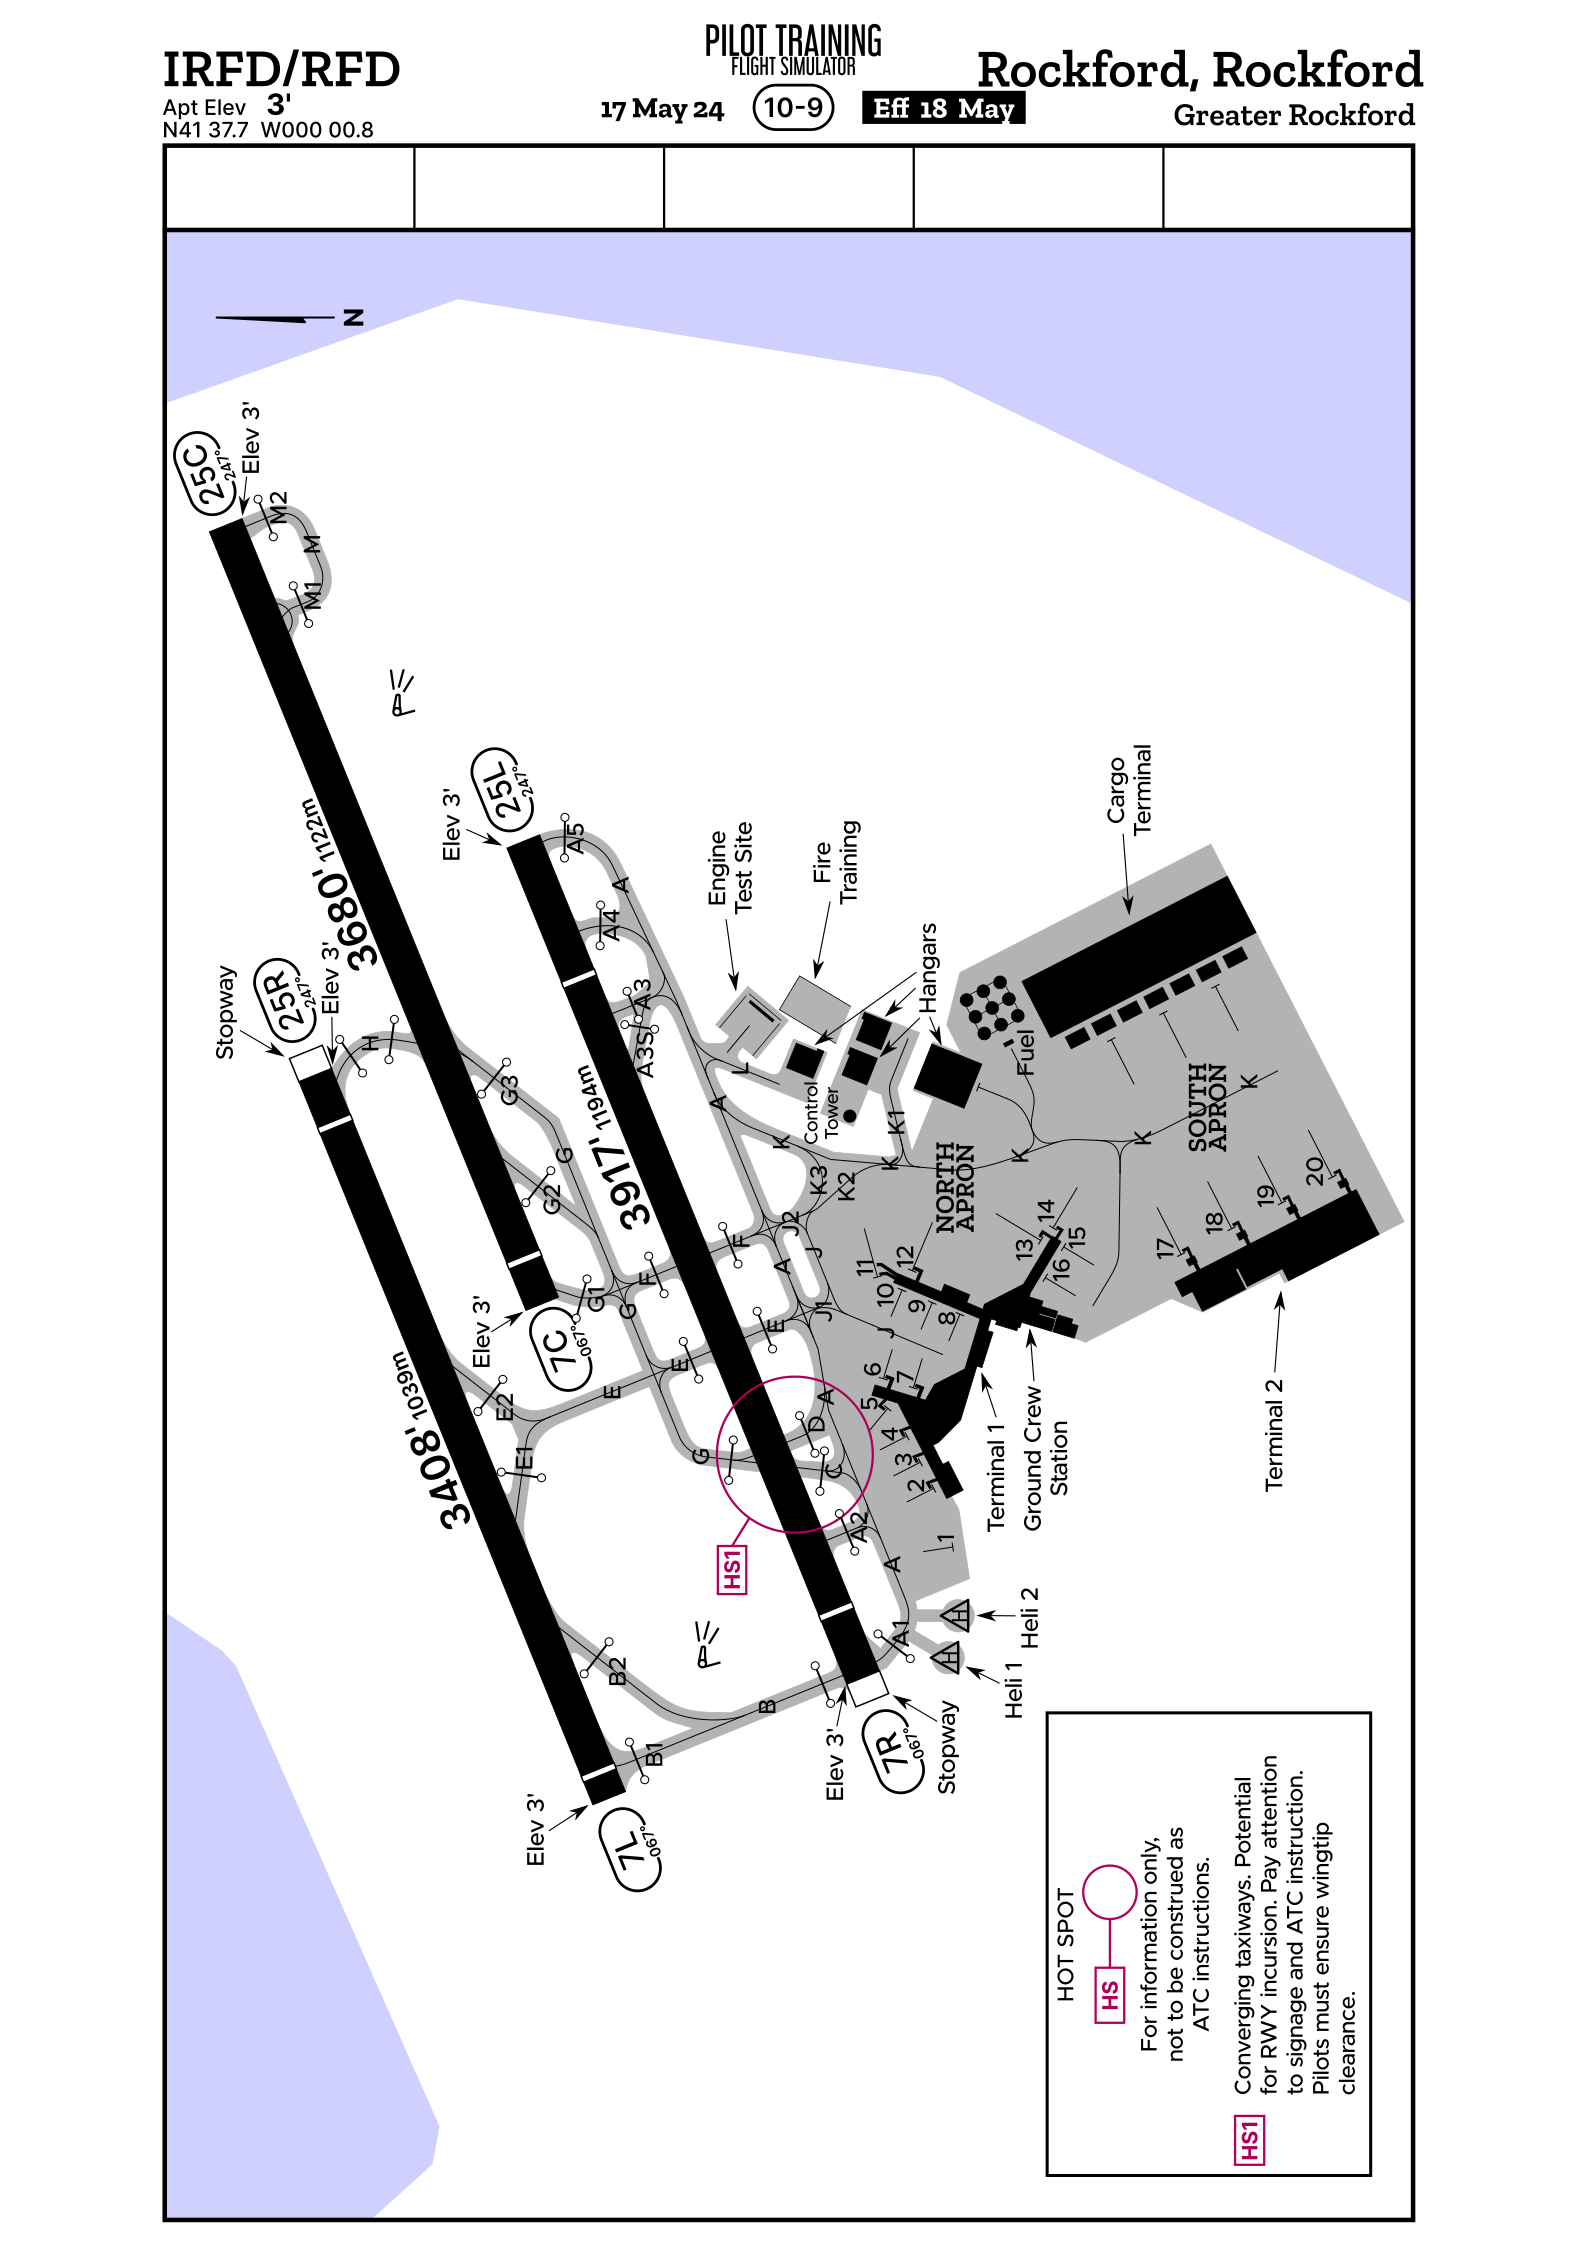 Airport ground chart for the airport IRFD